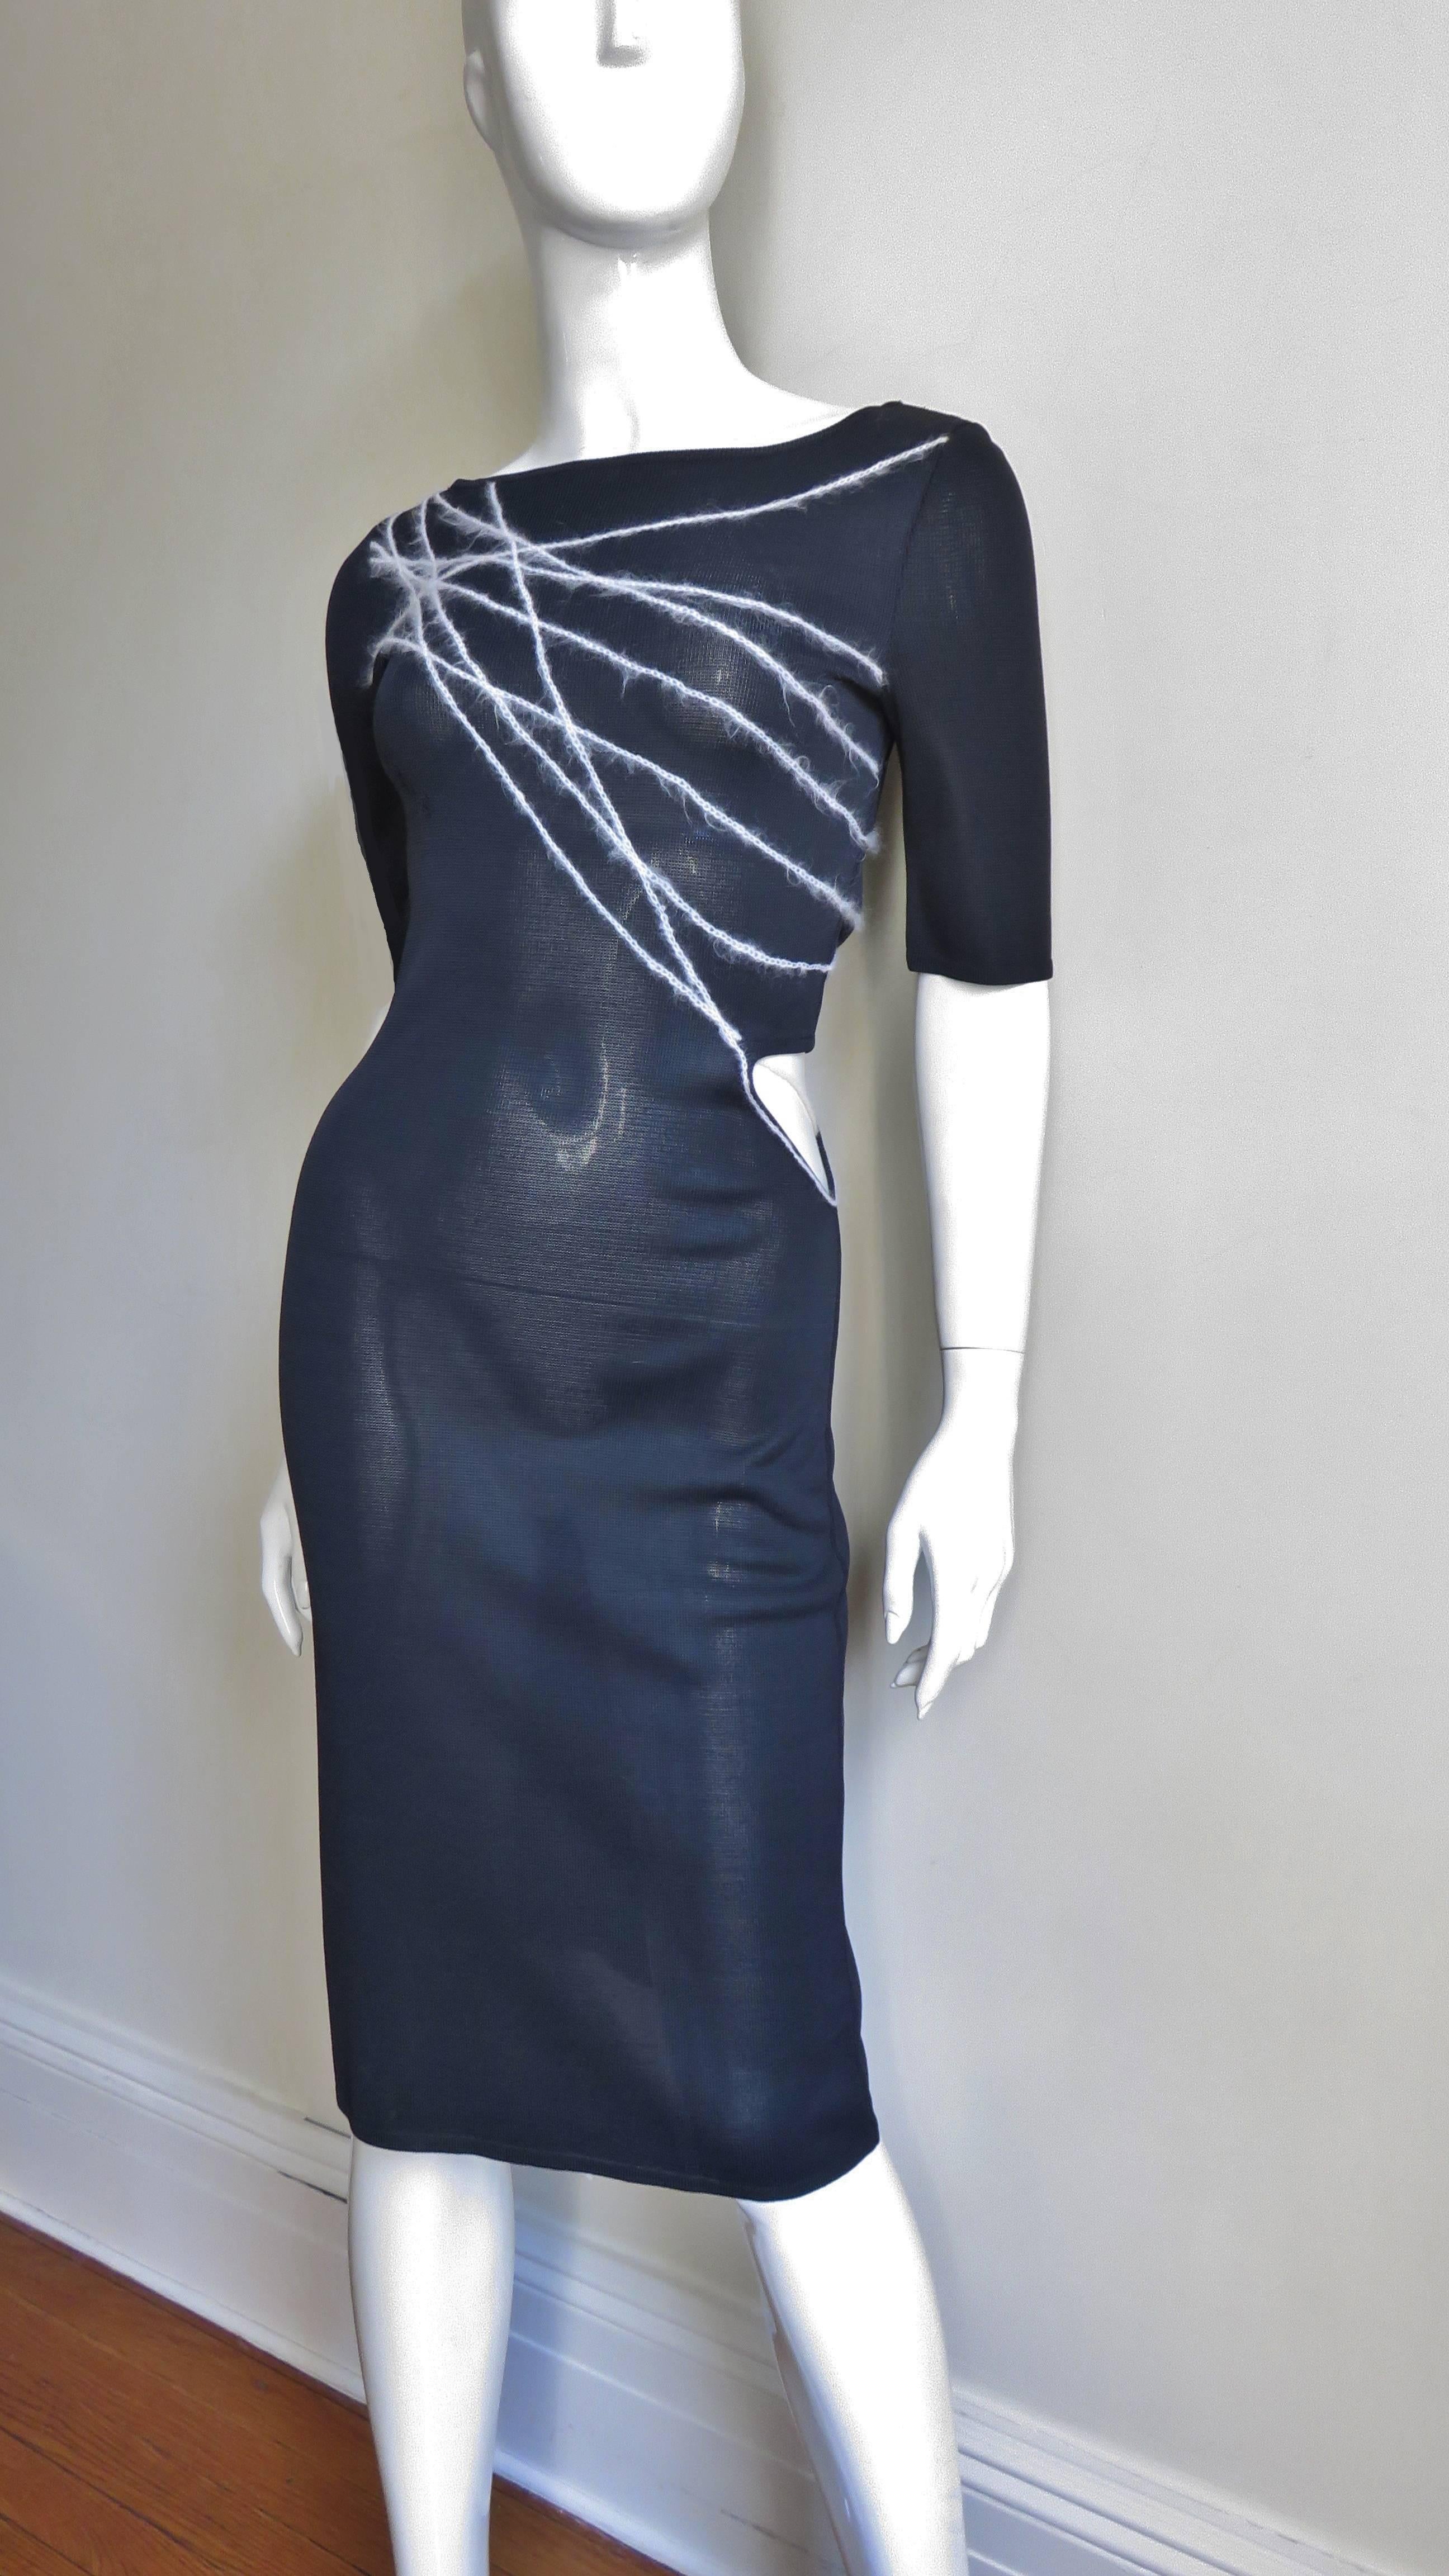 A great black knit dress from Gianni Versace Couture.  It is fitted with a scoop neck, elbow length sleeves and contrasting white lines of yarn abstractly crossing the bodice diagonally front and back.  There is cutout at the waist.  It is unlined